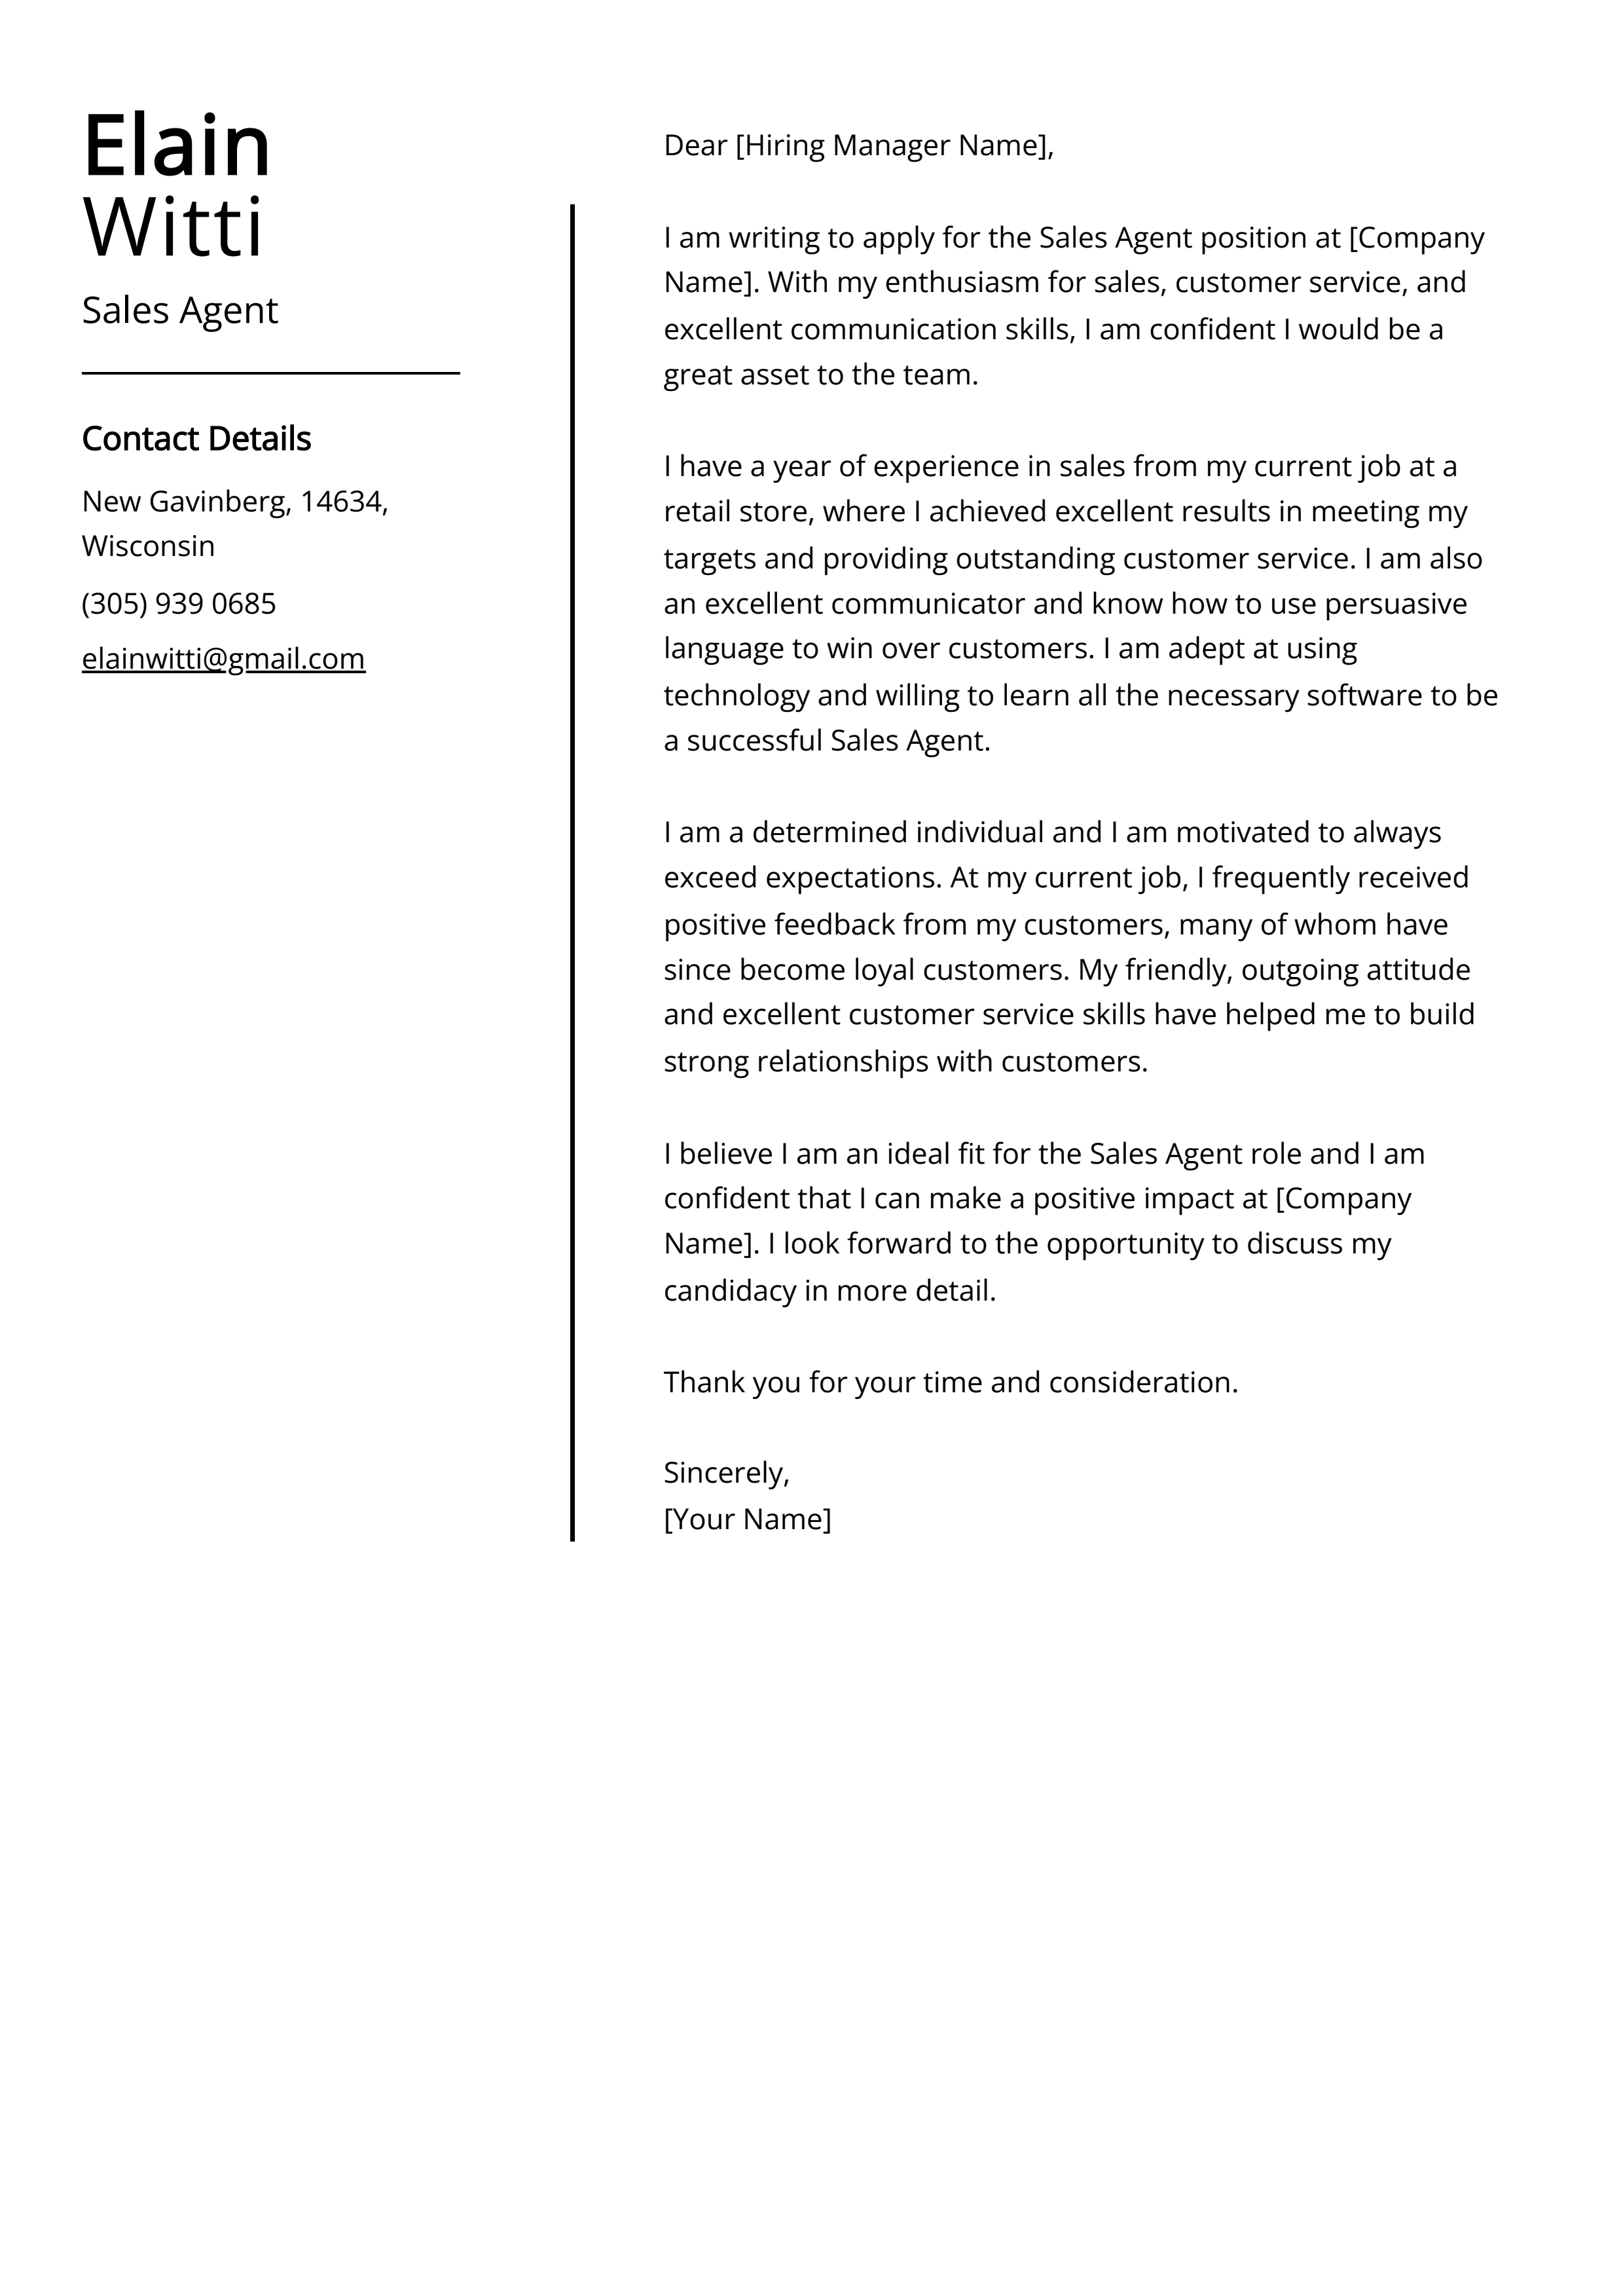 Sales Agent Cover Letter Example